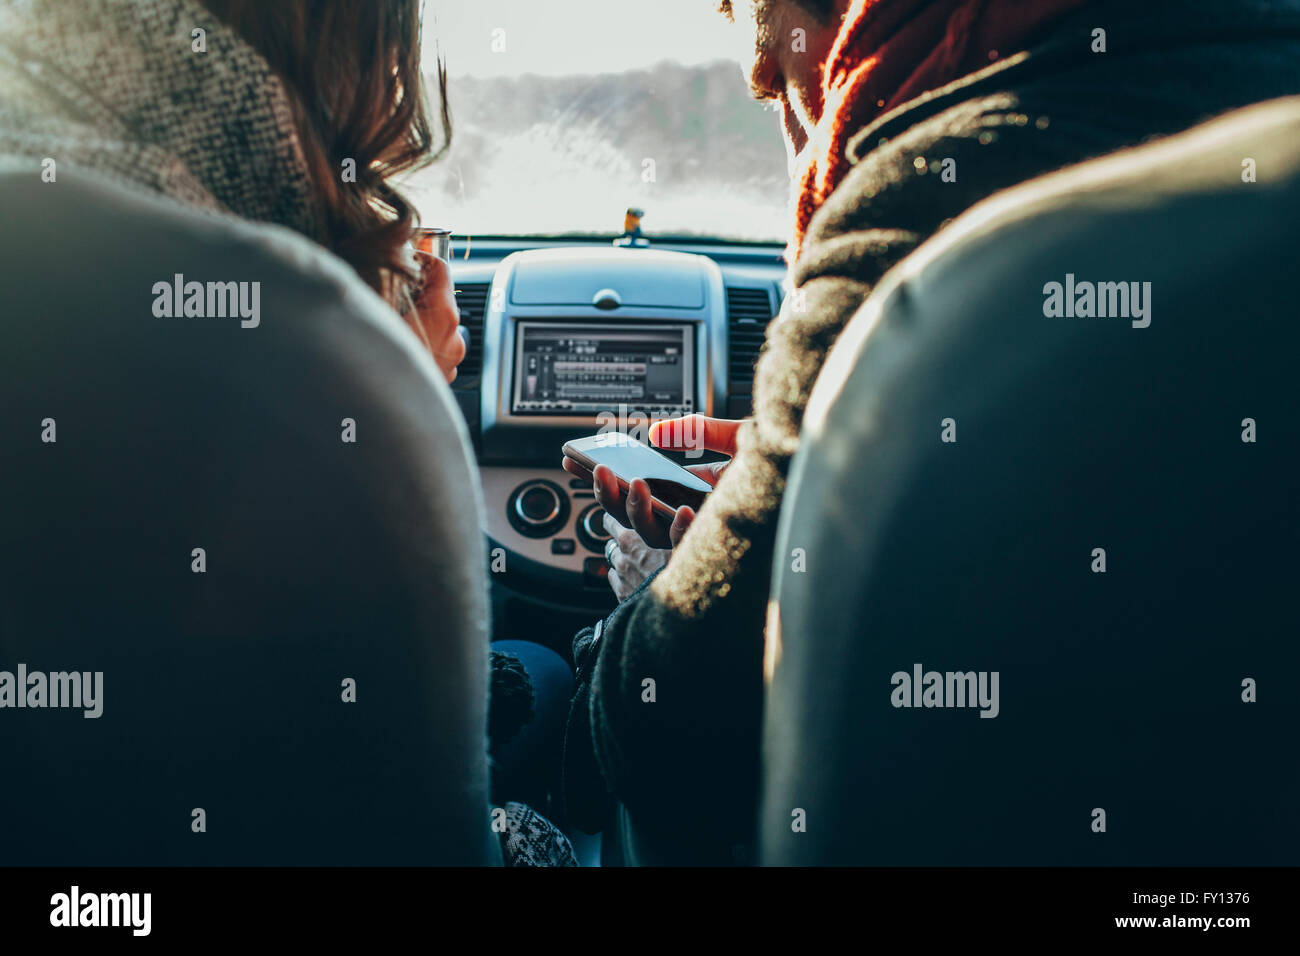 Cropped image of couple using smart phone in car Stock Photo